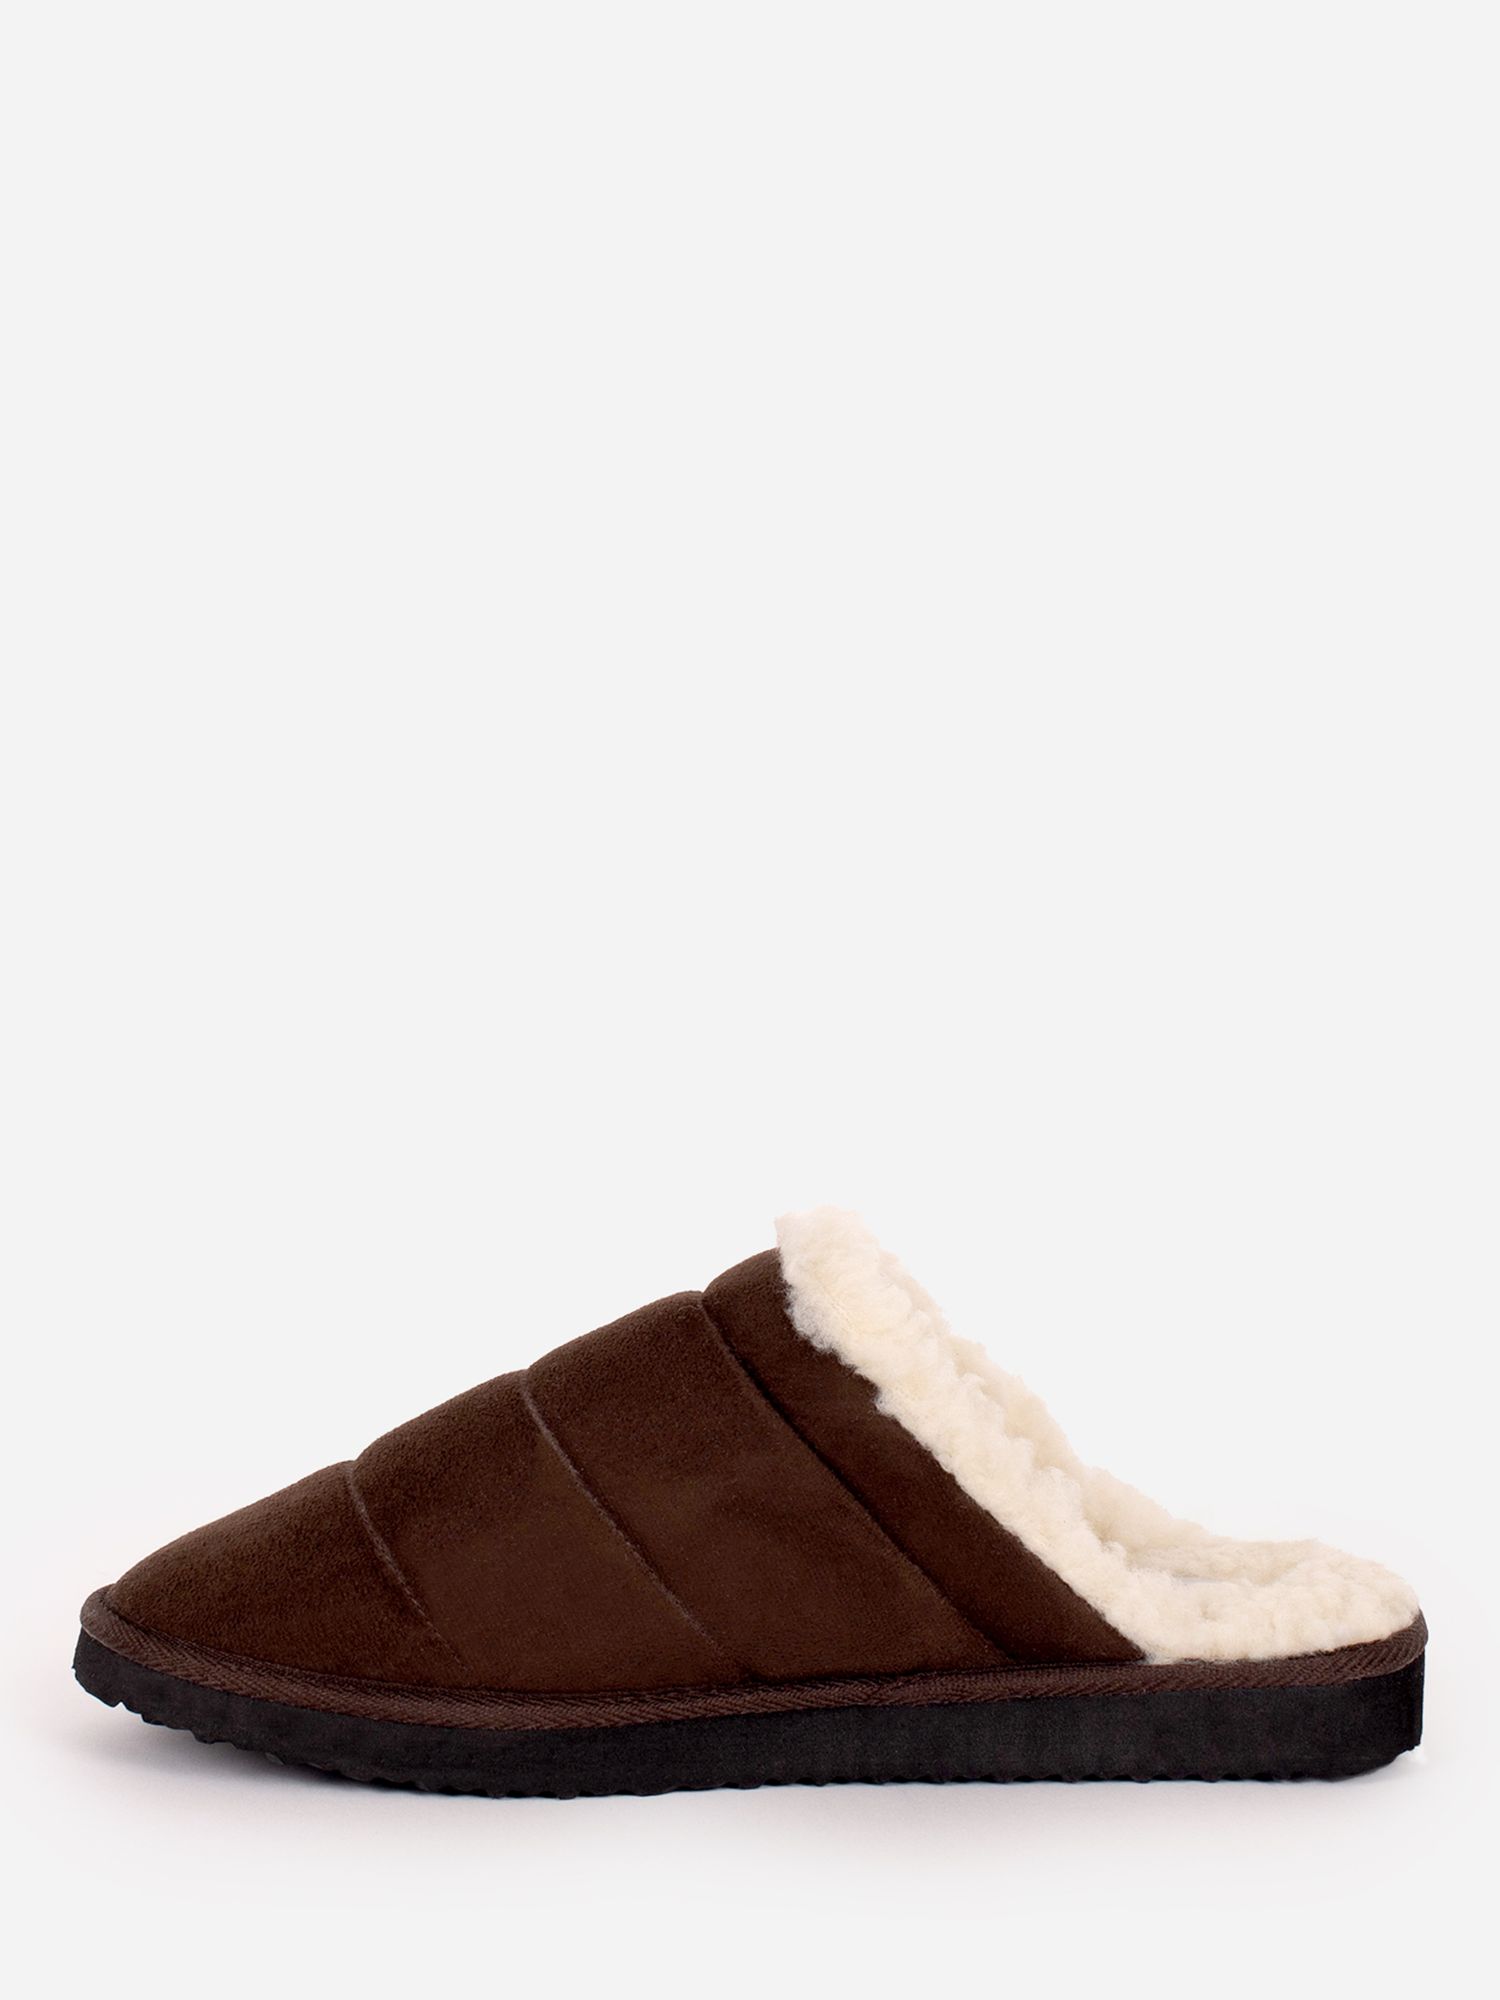 Brakeburn Quilted Backless Slippers, Brown at John Lewis & Partners